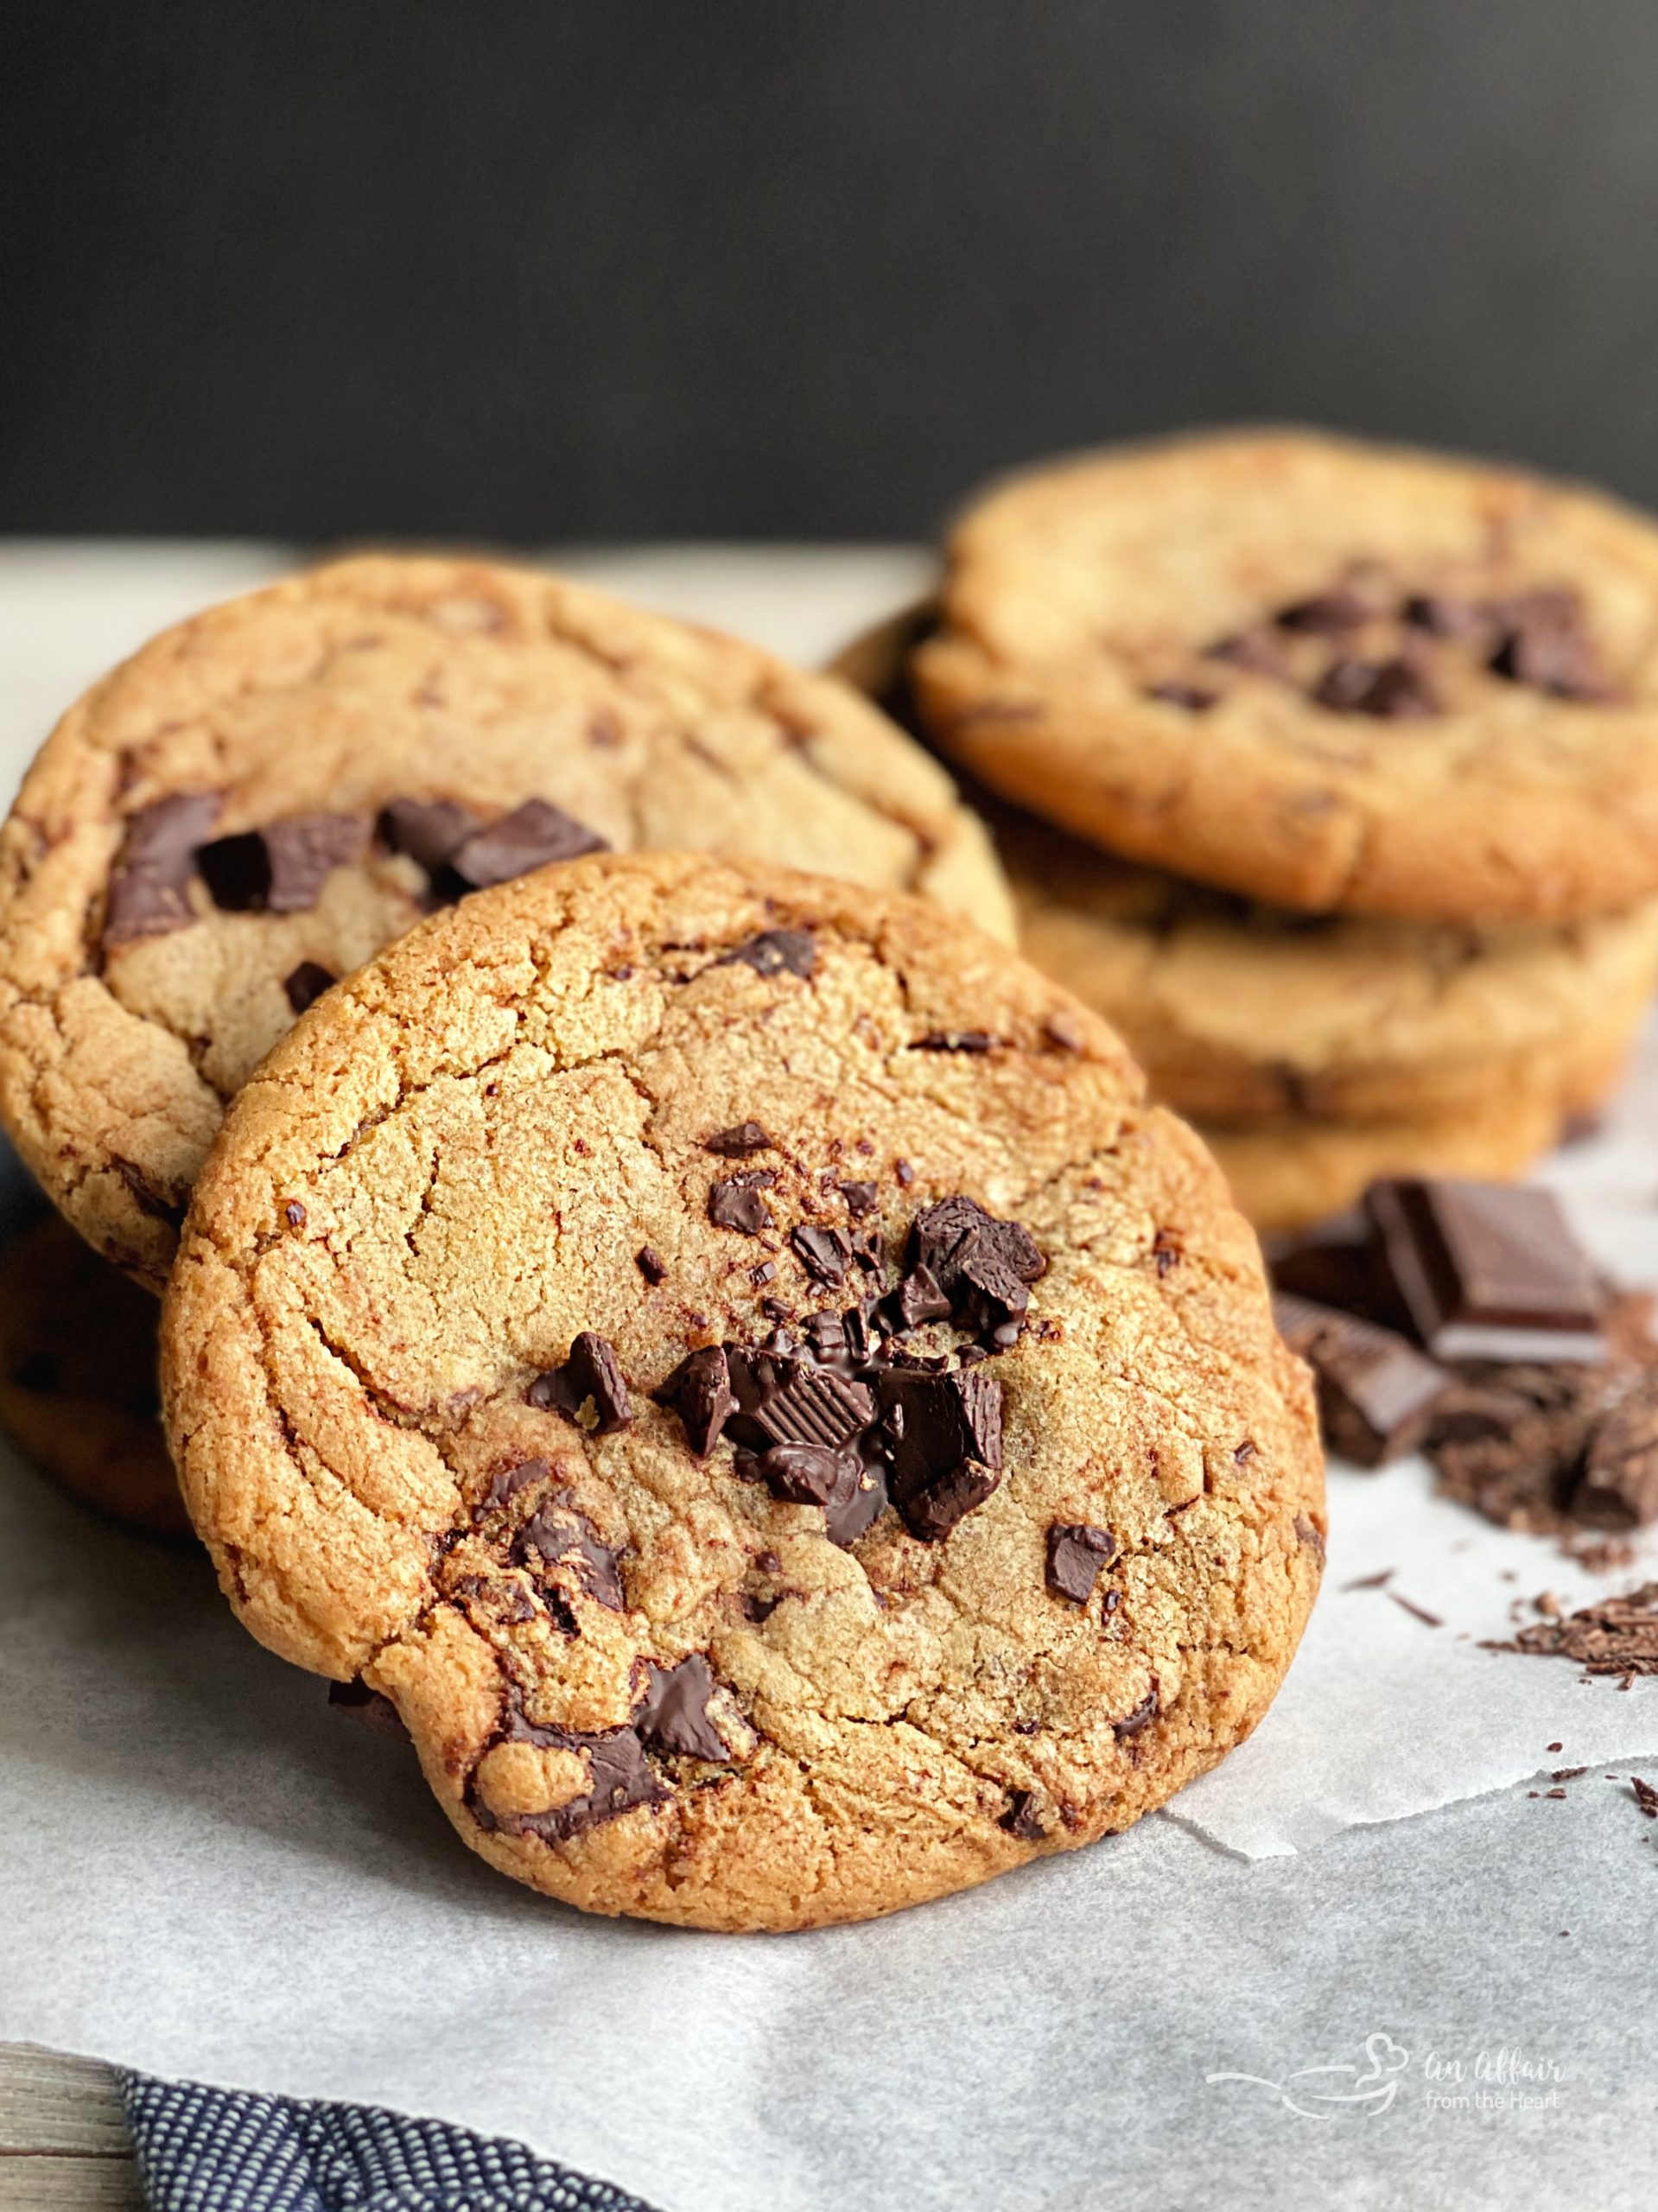 https://anaffairfromtheheart.com/wp-content/uploads/2020/05/Brown-Butter-Chocolate-Chunk-Cookies-copy-2-scaled.jpg